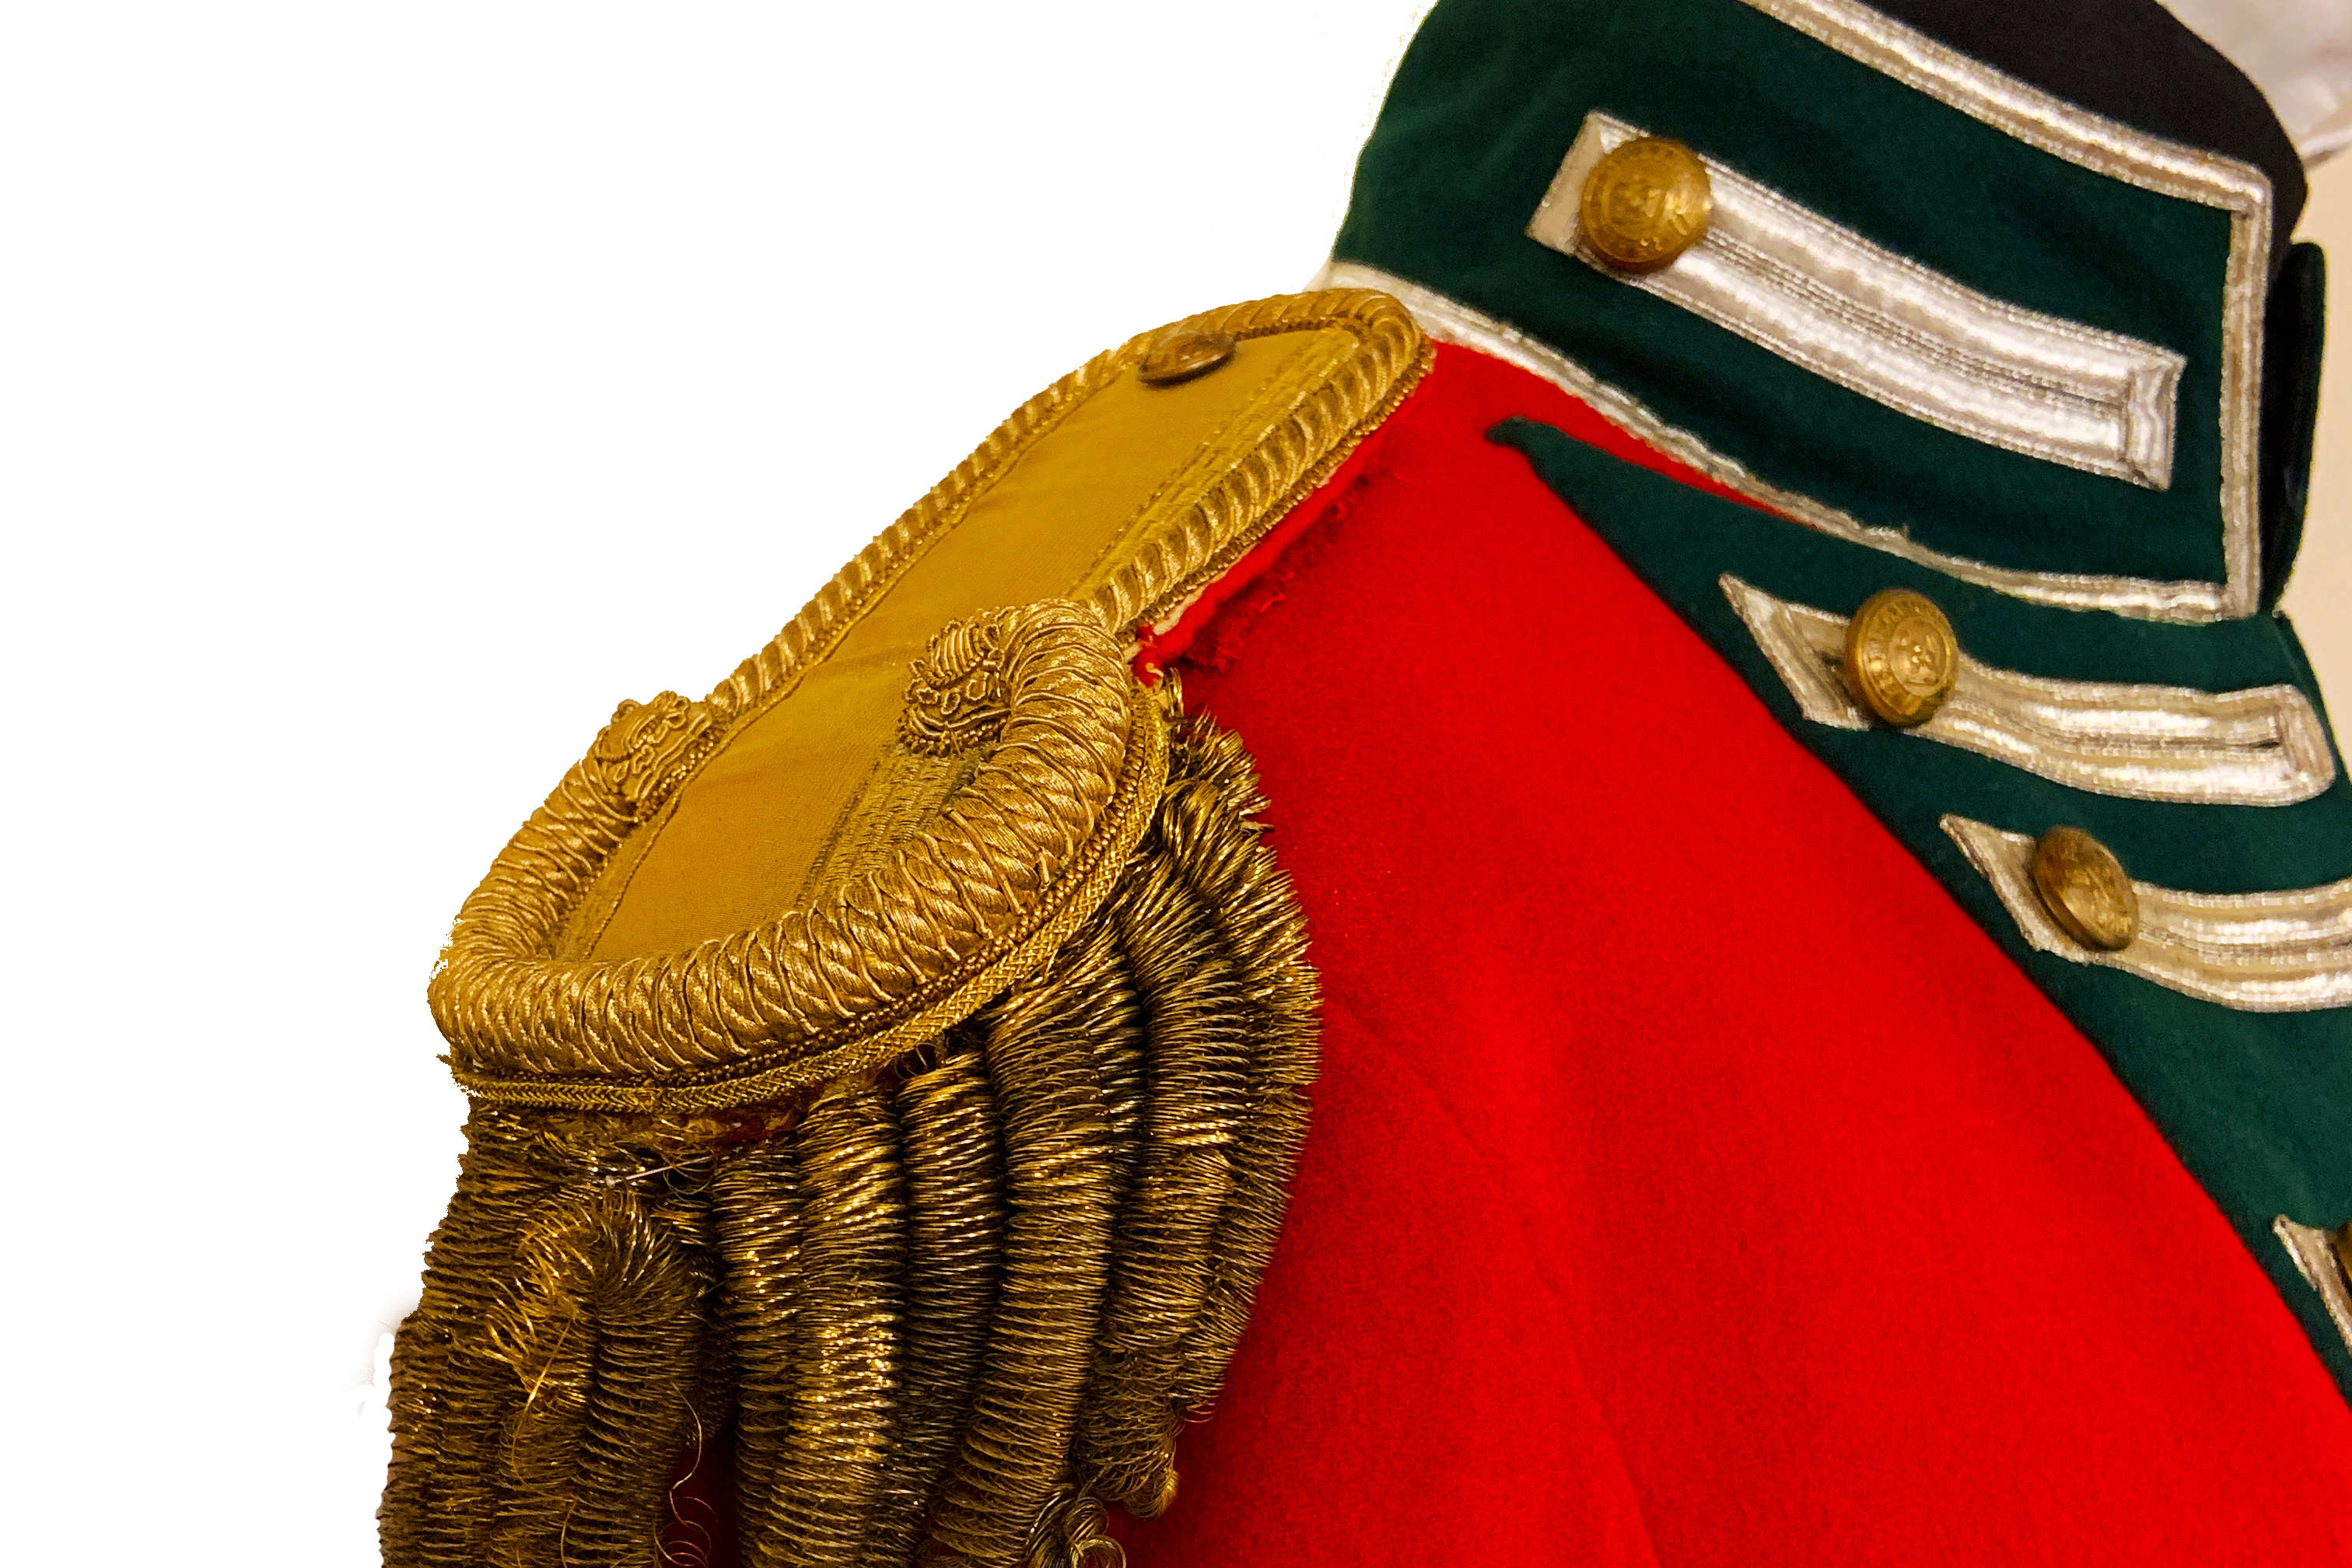 Wedding Military Outfit (detail), Sense and Sensibility, 1995, Ang Lee, director. Worn by Alan Rickman as Colonel Brandon. Jenny Beavan and John Bright, costume designers